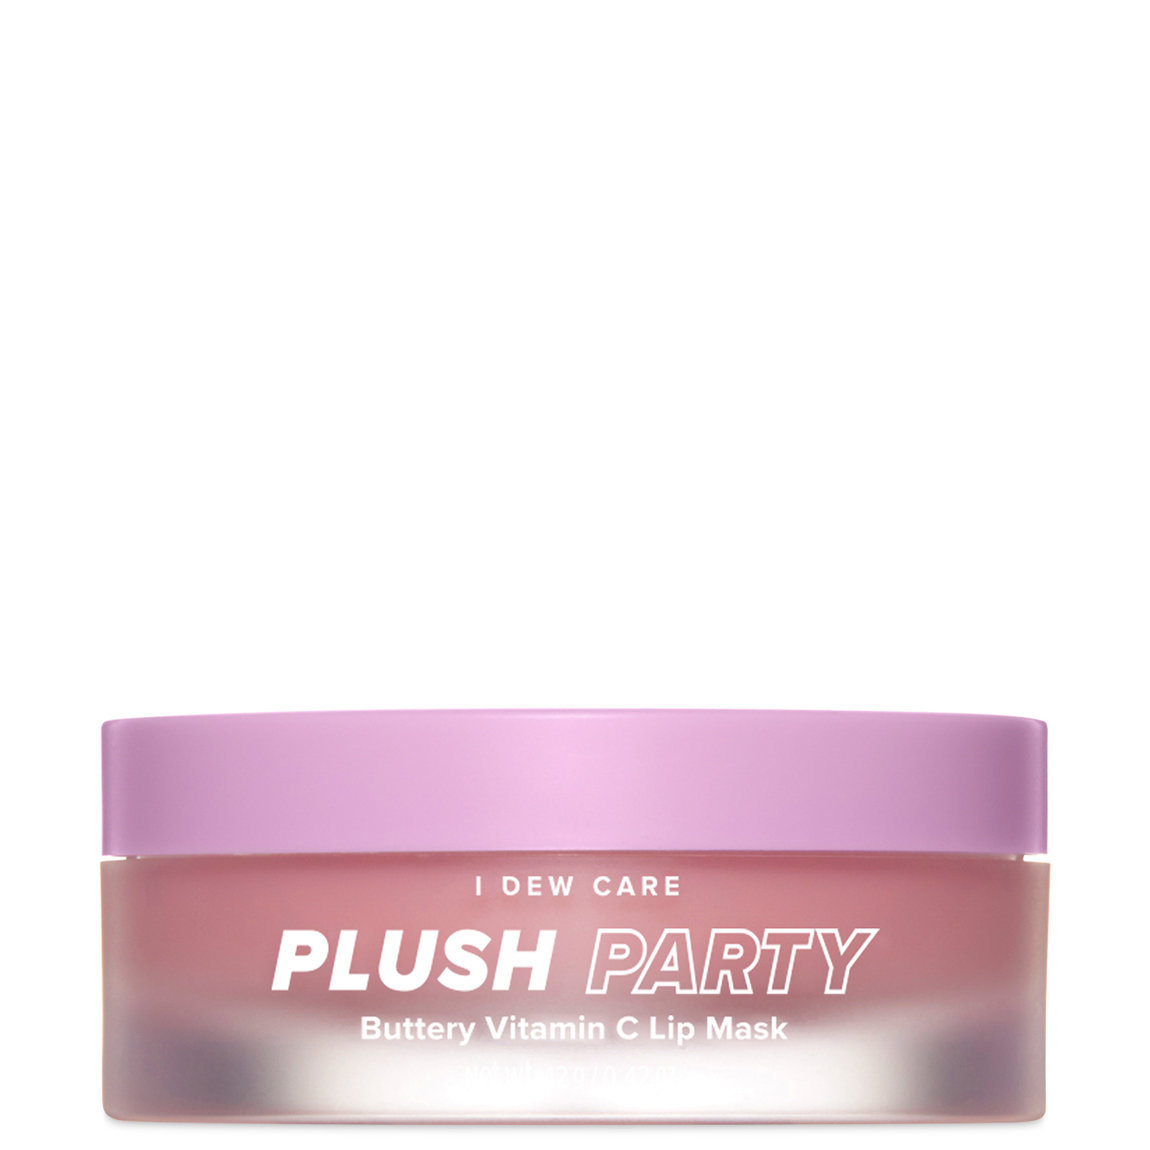 I Dew Care Plush Party alternative view 1 - product swatch.